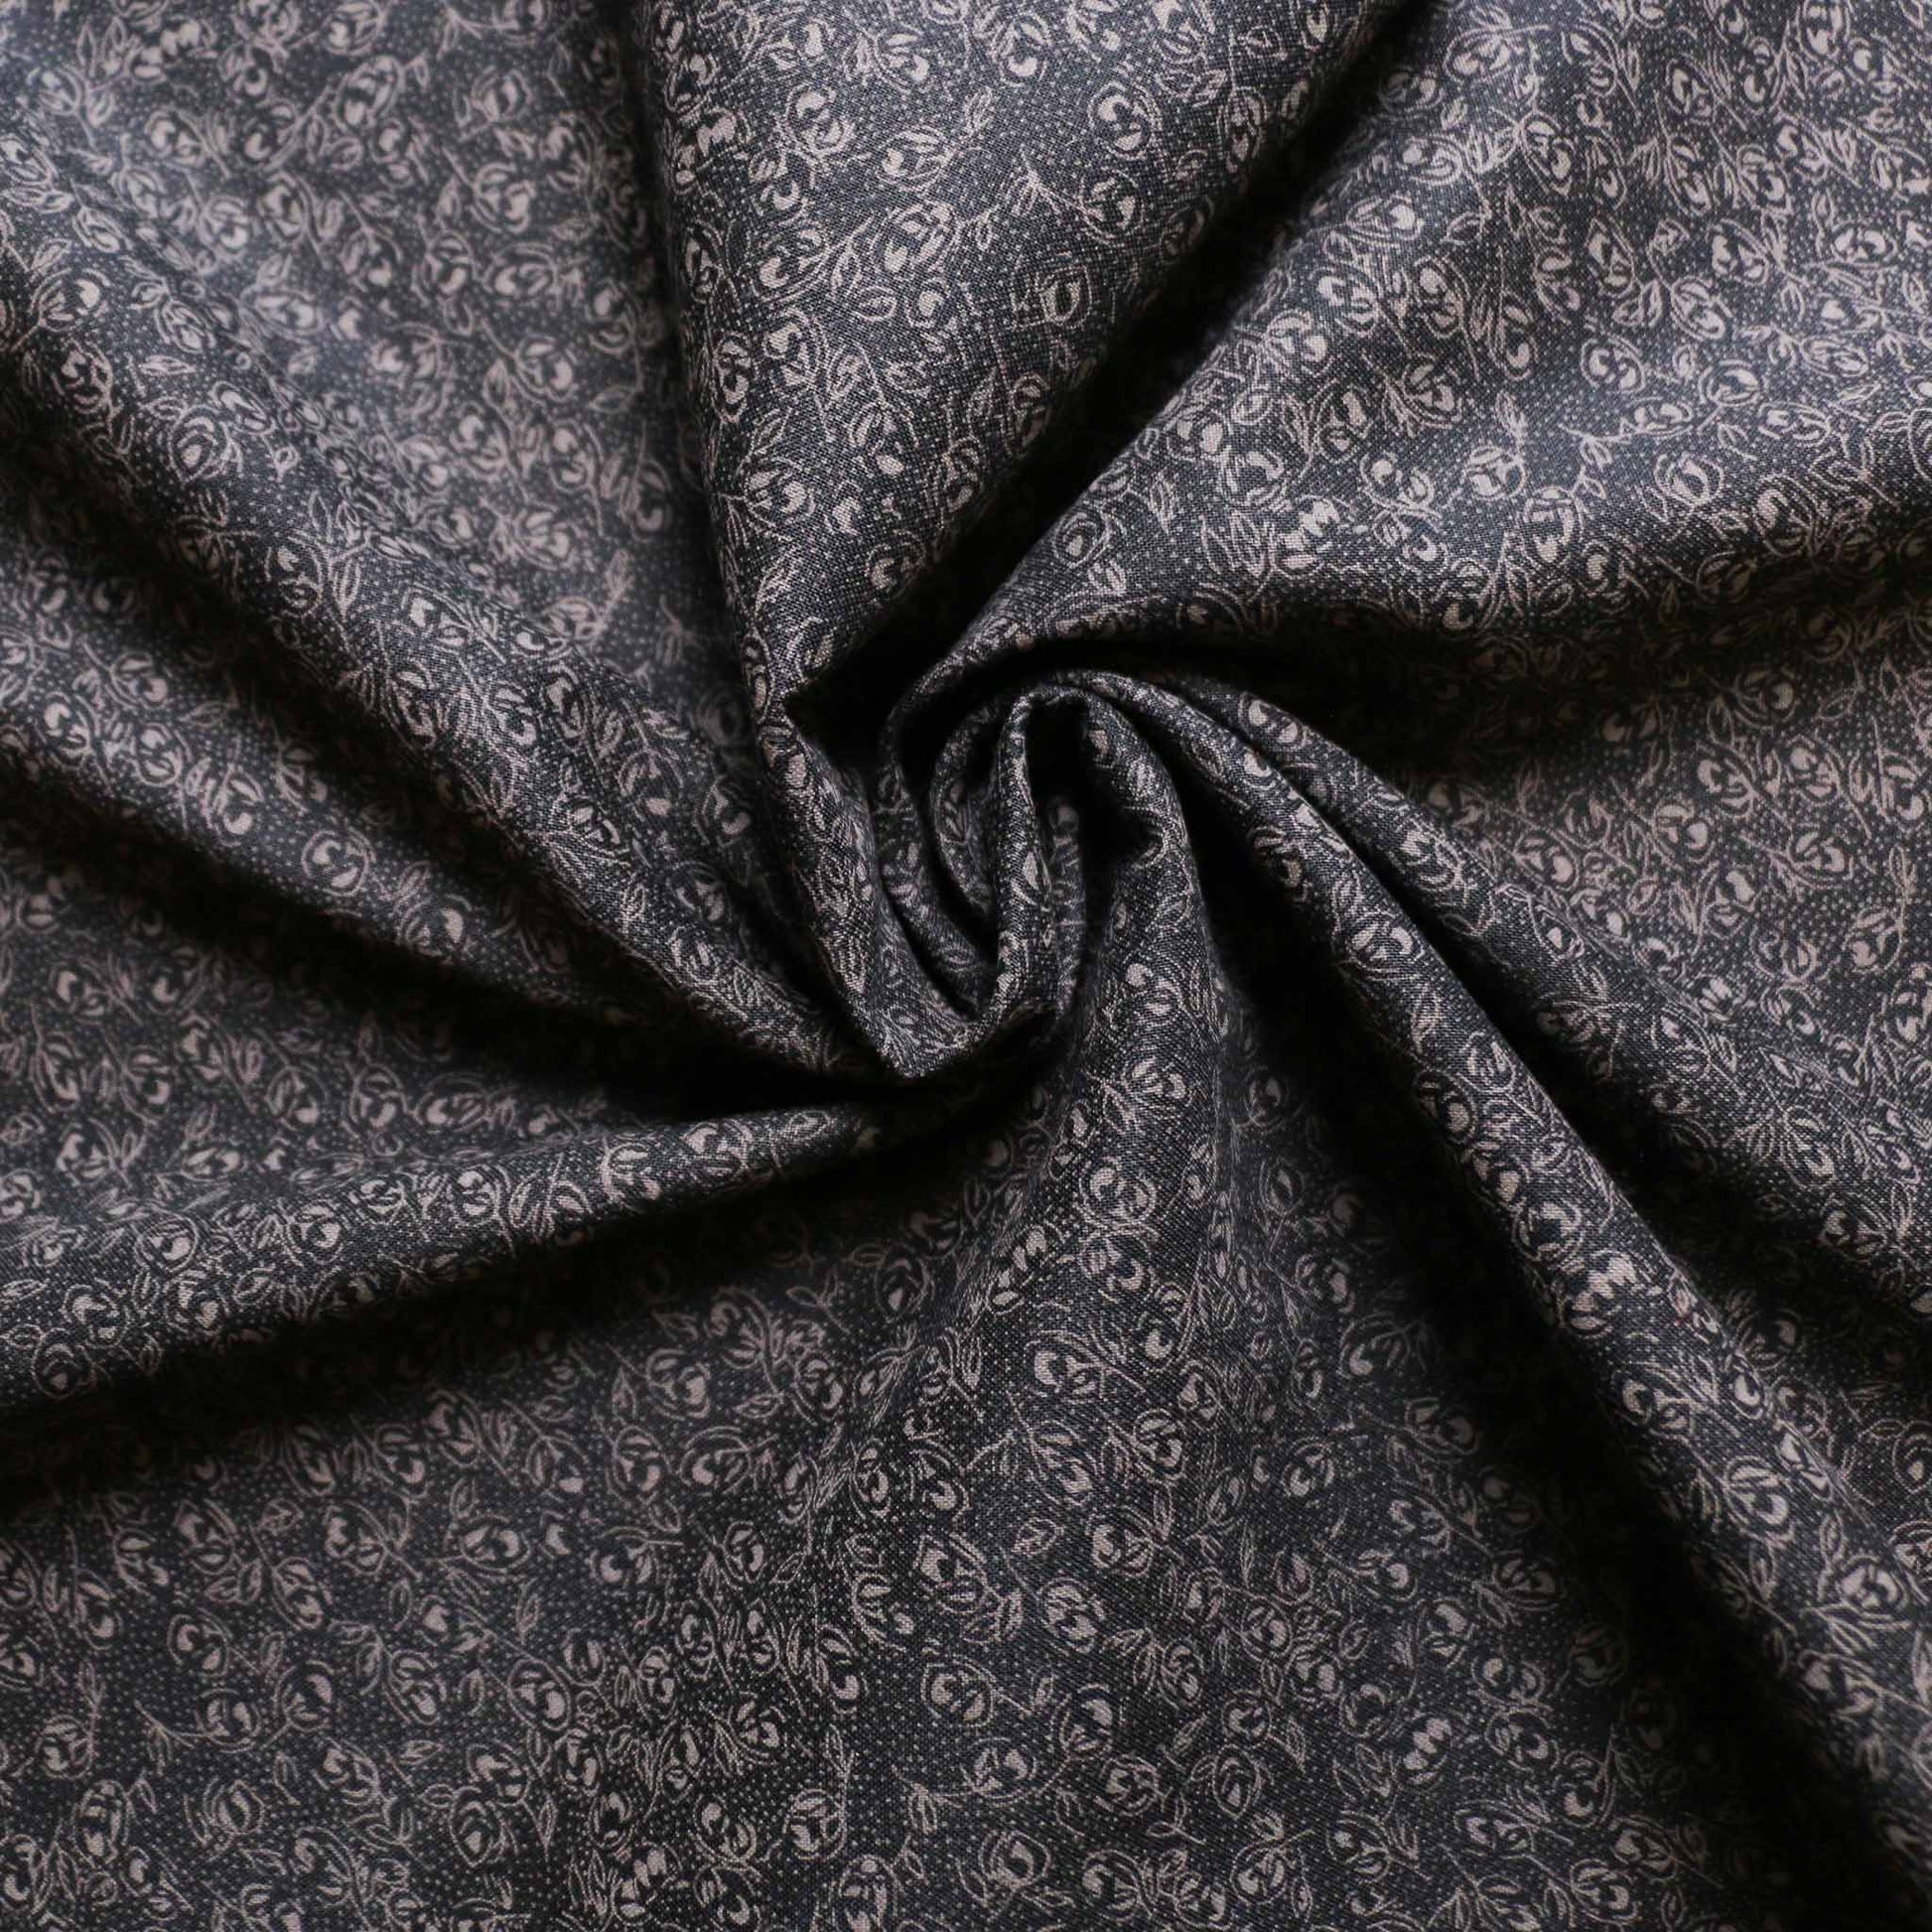 vintage cotton dressmaking fabric in black with grey ditsy floral print